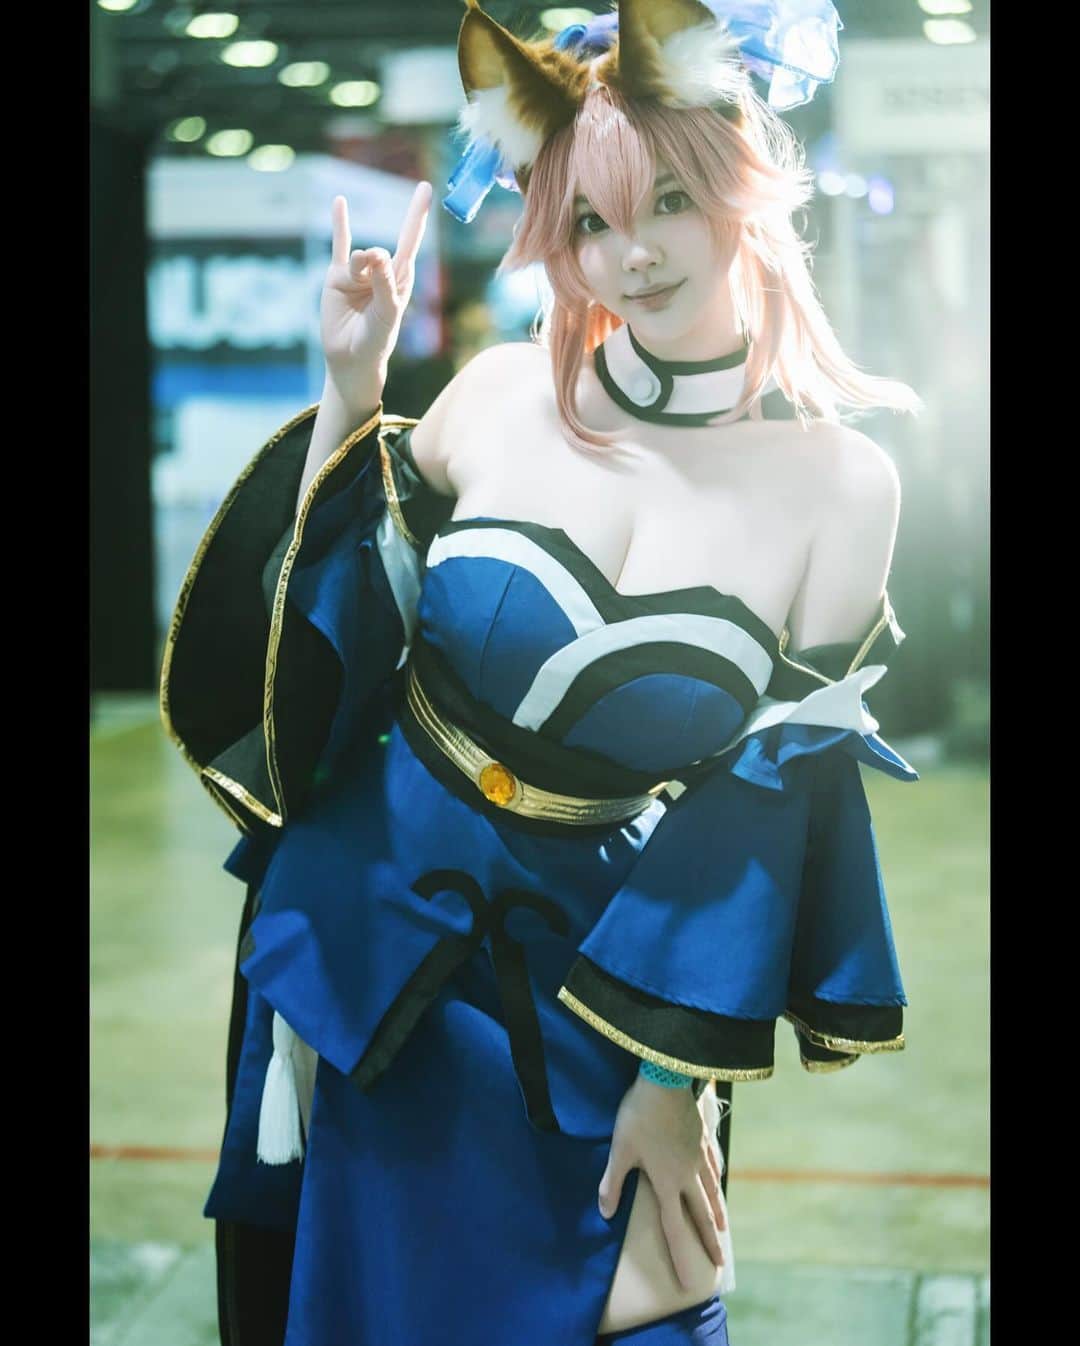 YingTzeのインスタグラム：「Tamamo at AFA Singapore 2023 🦊💖  ( swipe left for time travel back to 10 years ago ✨🫰🏻)  When I got my booth for @animefestivalasia this year , I tell myself that “ I must cosplay Tamamo !!! “ A lot of you must be wondering why am I cosplaying such an old character 🤣 Because Tamamo was the first character that I cosplayed in Singapore when I got my first opportunity to be featured as a Cosplay Guest. This year is my 10th Anniversary 💖✨  When I first started cosplaying in 2005 , I would never imagine that one day .. I would have the chance to stand on stage and be featured in events as Cosplay Guest . I’m a very shy person and I don’t have much confidence so when SOZO asked me if I’m interested to be Guest  Cosplayer for Funan Anime Matsuri 2013 , I almost don’t want to try 🥲 I was like “ what if don’t have people wanna come meet me ? “ and “ I’m not good enough to be a Guest laaaa “.  Despite all the self-defeating thoughts , I’m glad that I took the leap of faith . 💖 That’s why I always say that Singapore always has a special place in my heart . It’s been 10 years and I’m so grateful to have continuously receive your love and support . Special shoutout to Jacob who shared the old photos of my Tamamo with me 😘💖  Thank you my Dear Singaporean Fammmmm ! ❤️ My heart is always full after meeting you all ! The 3 days event of 10am - 8pm boothing is really crazy ! Some people ask me how able to wake up at 7am and be at my booth by 9.30am : The answer is Your Love 🫰🏻💖 ( I’m so cringeeeeee ahhhhhhh shyyyyyy 🫣 )  📸 @prestonles.ig」